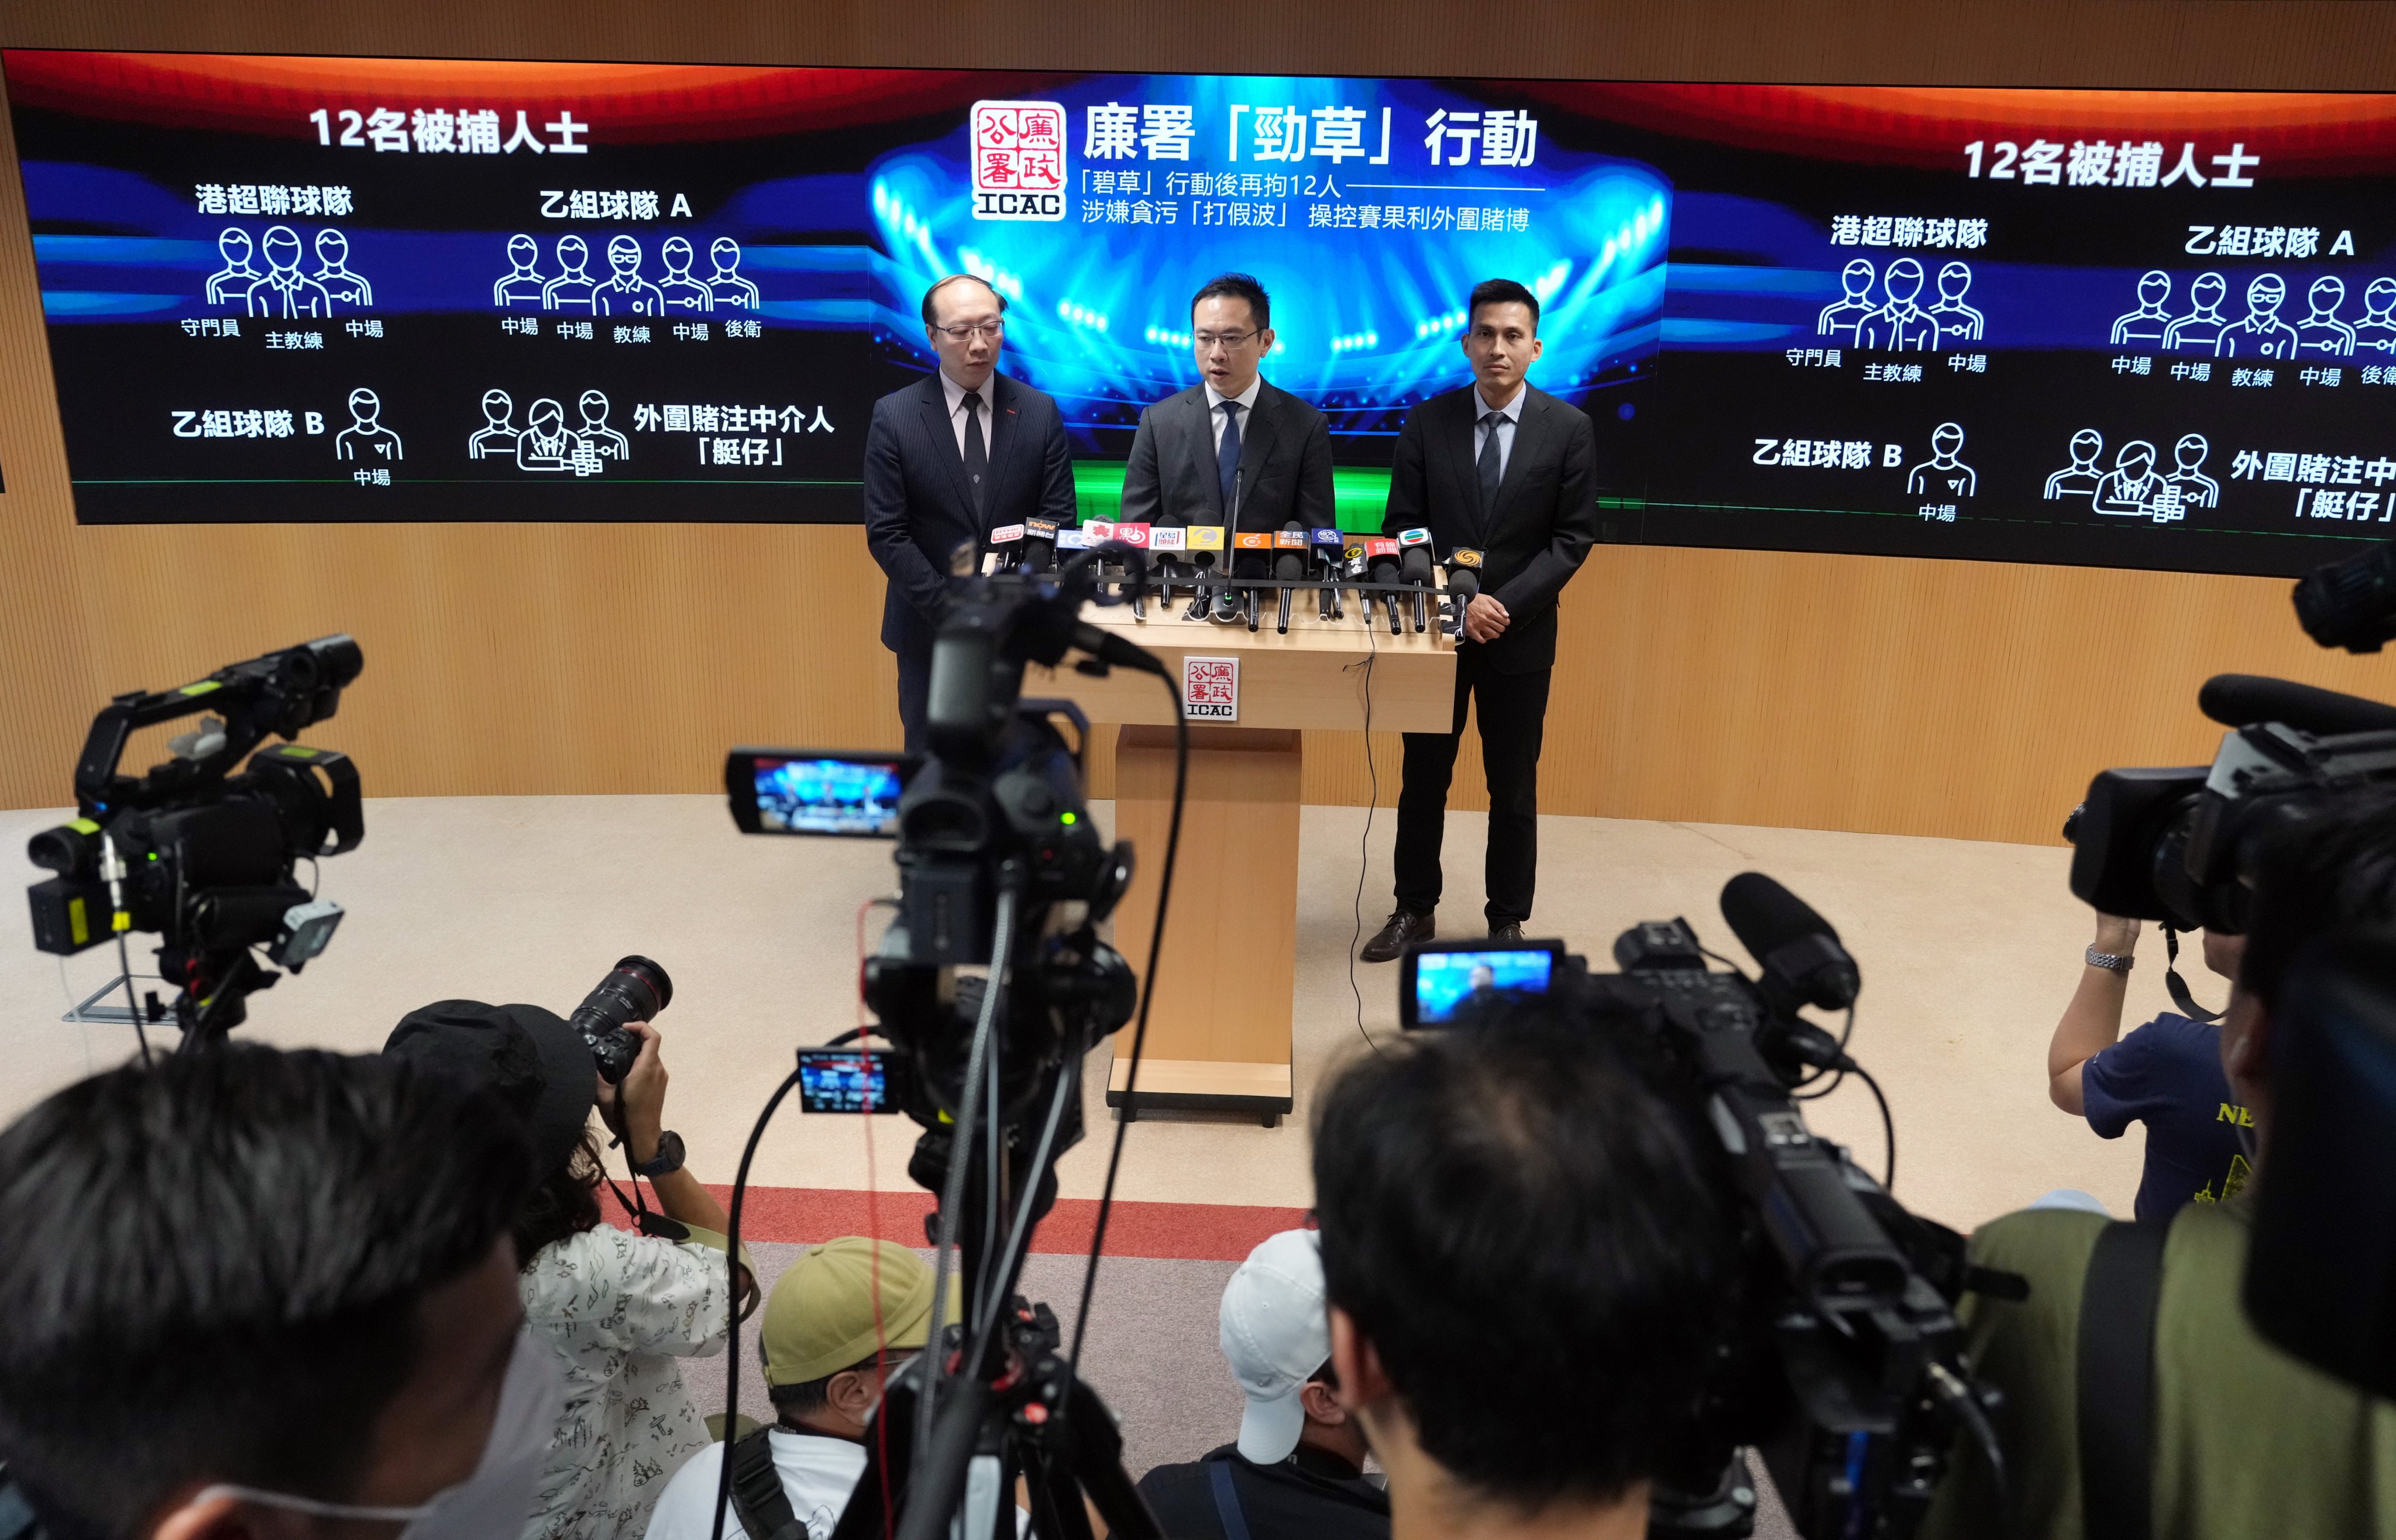 ICAC officials including Principal Investigator Matthew Chang (centre) brief the media on the arrests. Photo: May Tse